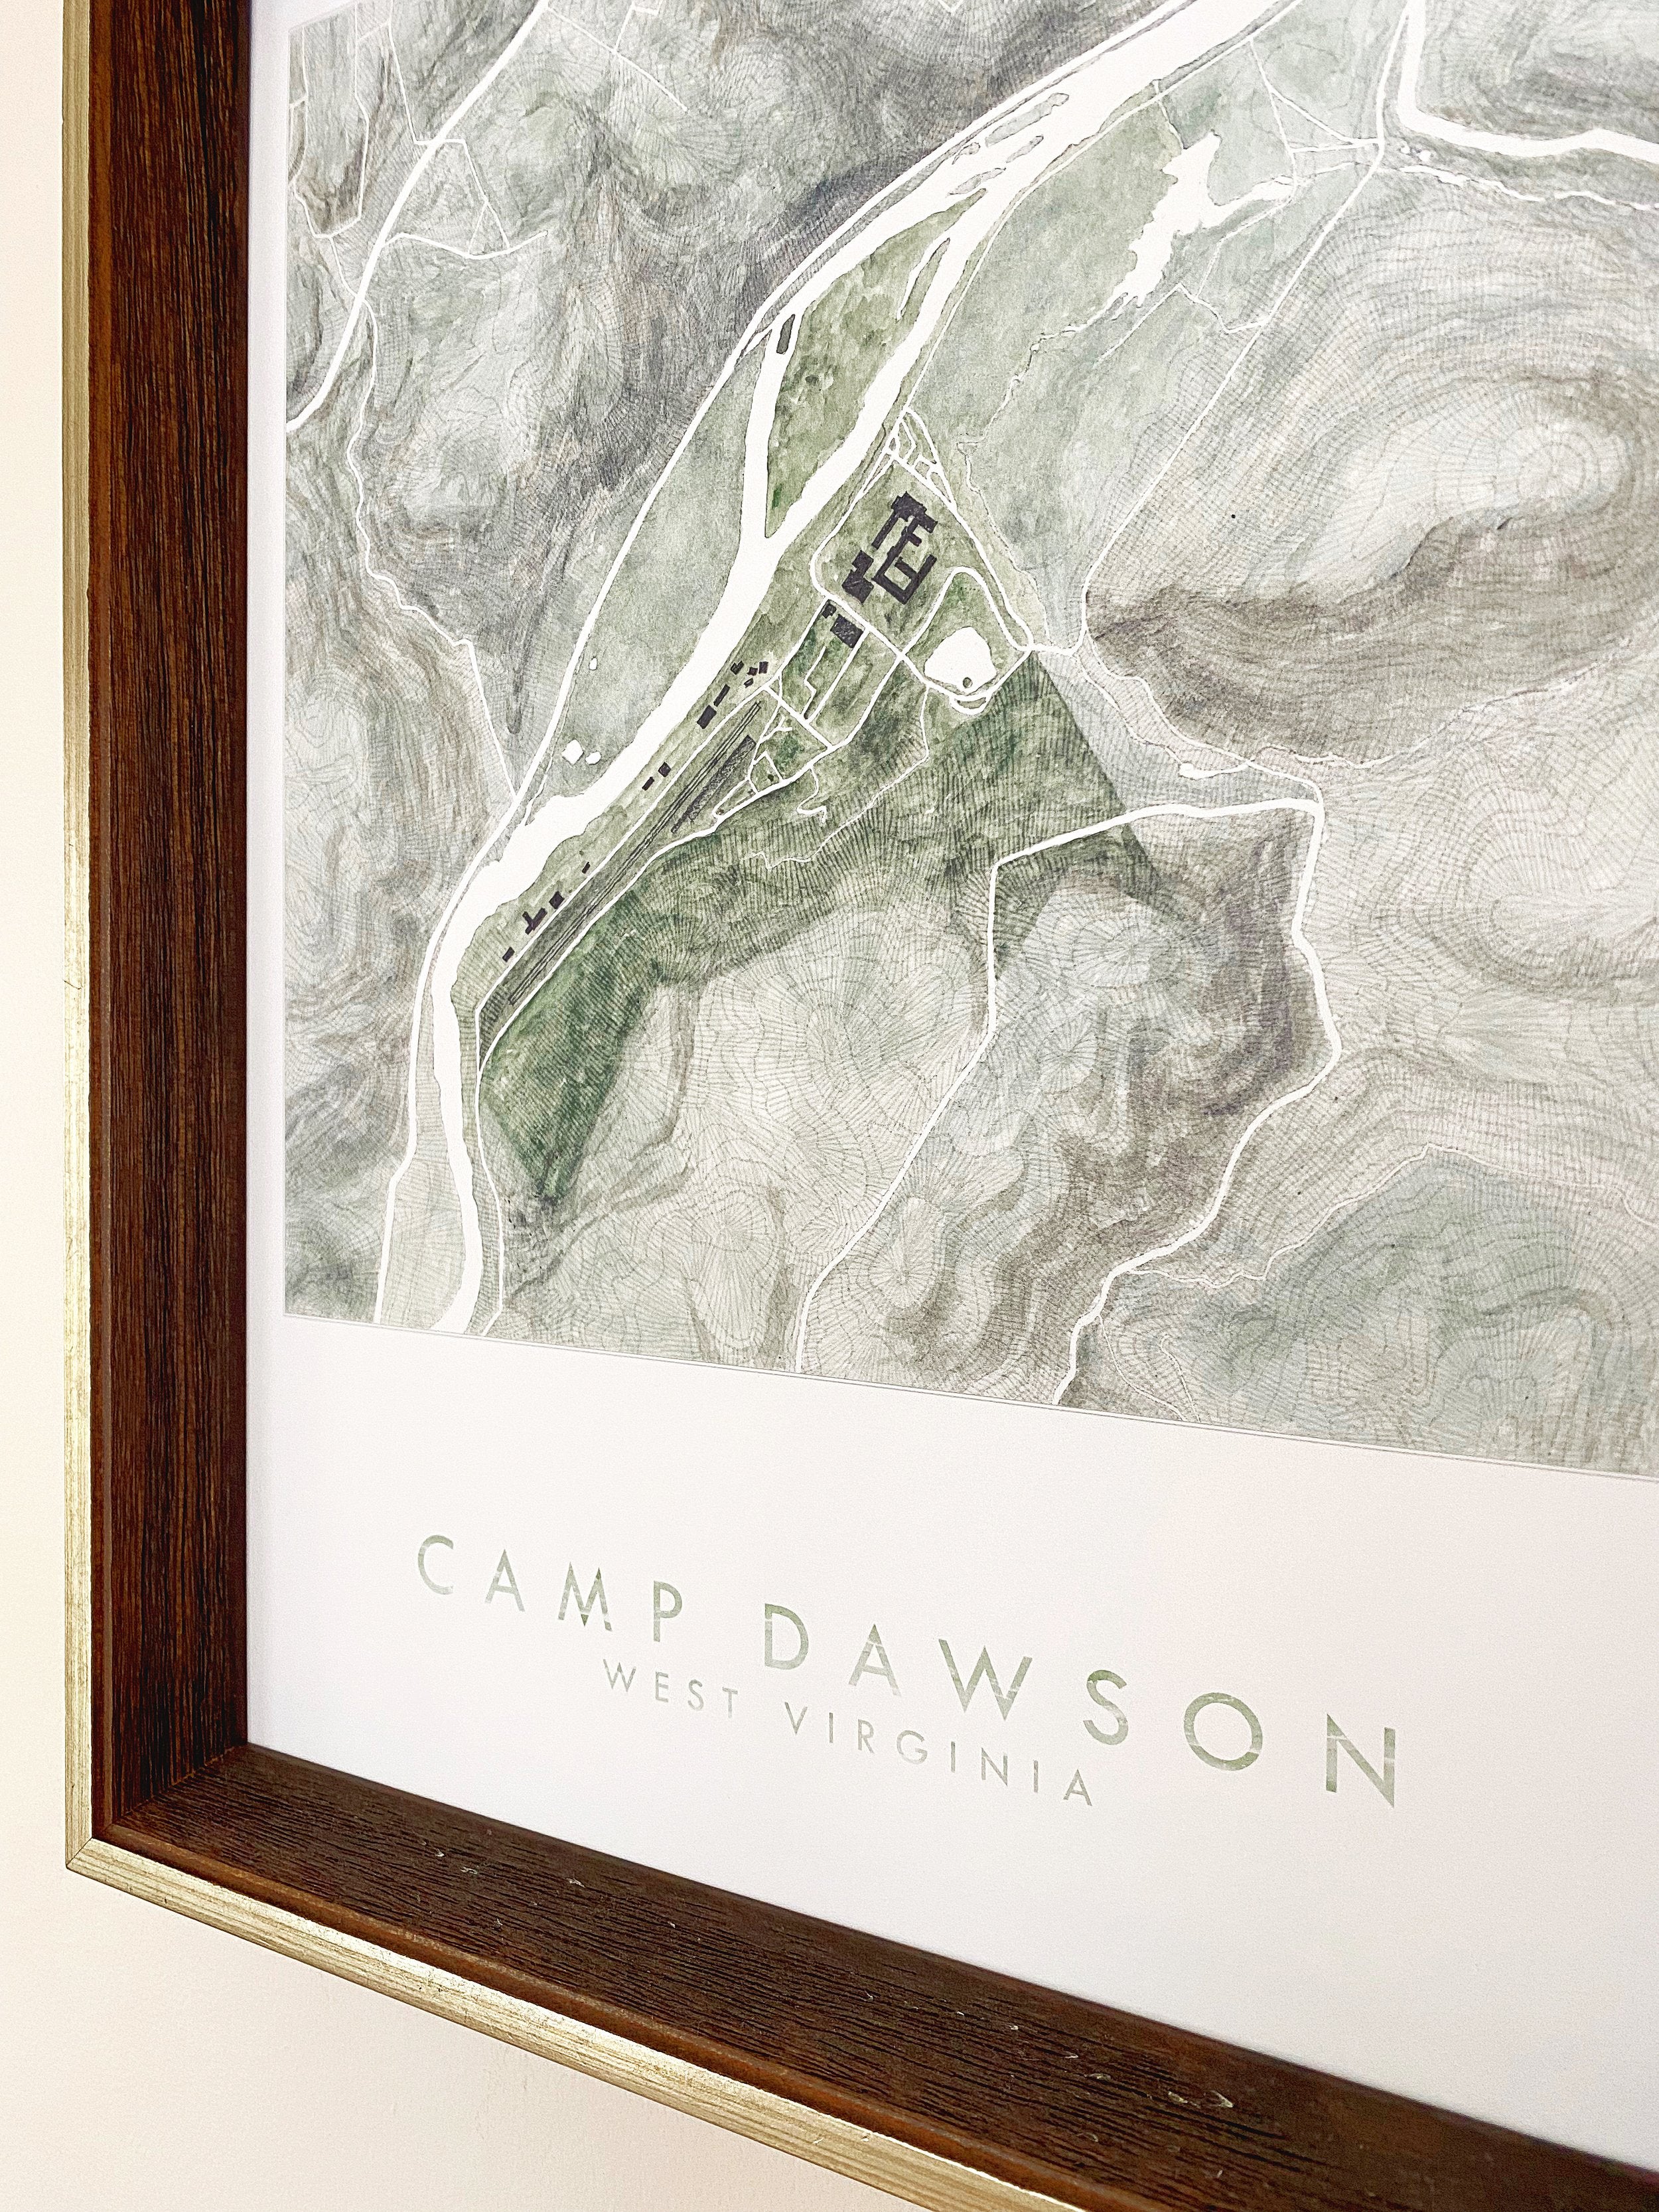 Camp Dawson WEST VIRGINIA Topographical Watercolor Map: PRINT